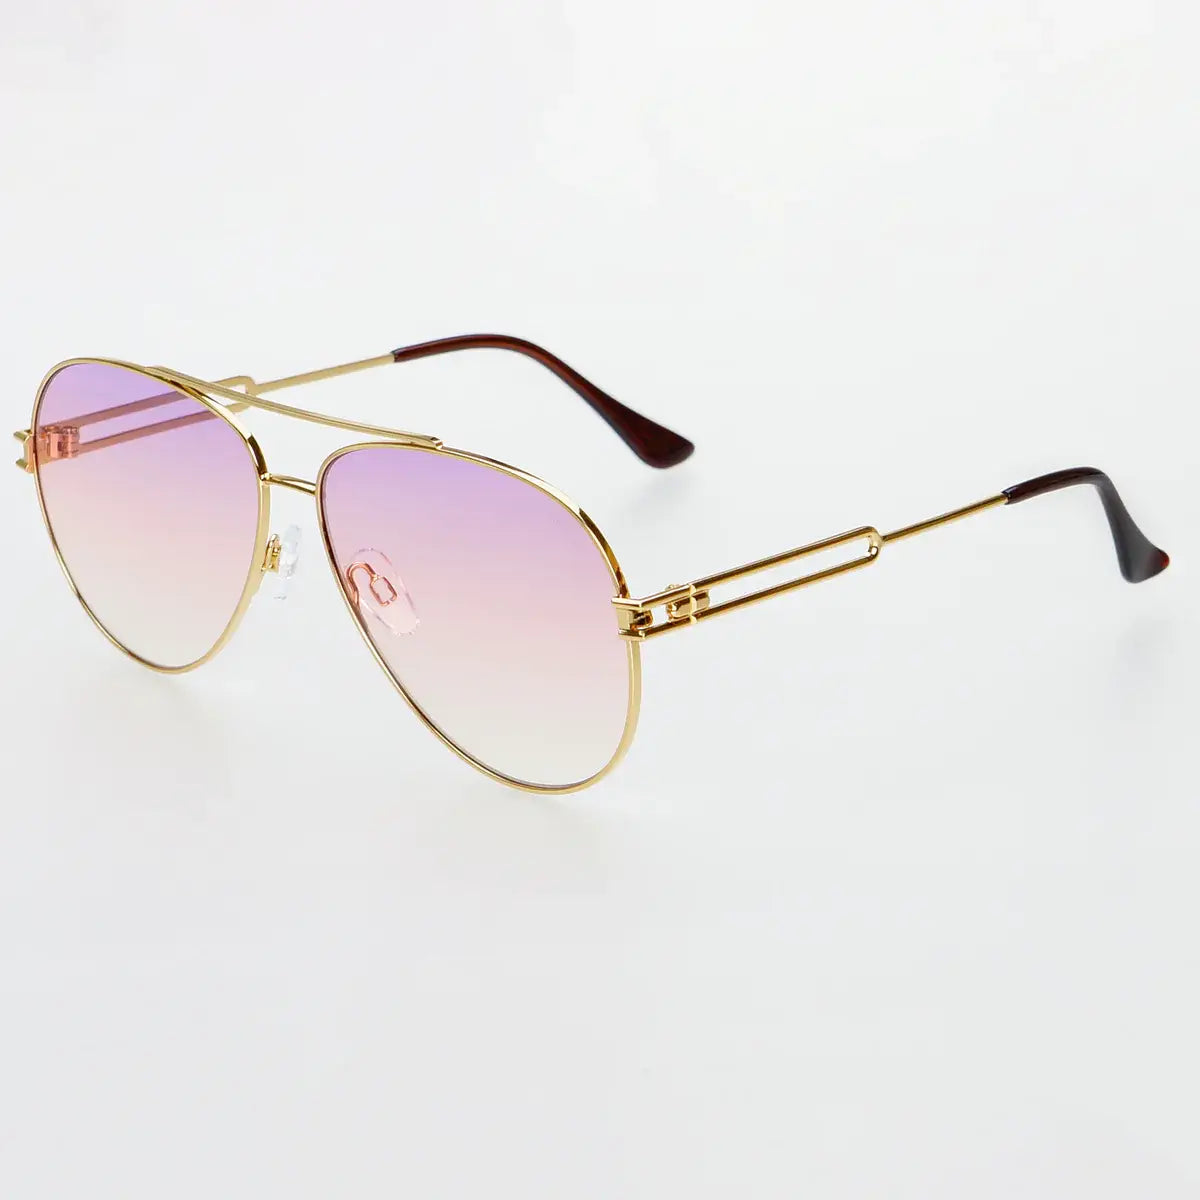 Henry Gold Pink Sunglasses: Gold / Pink